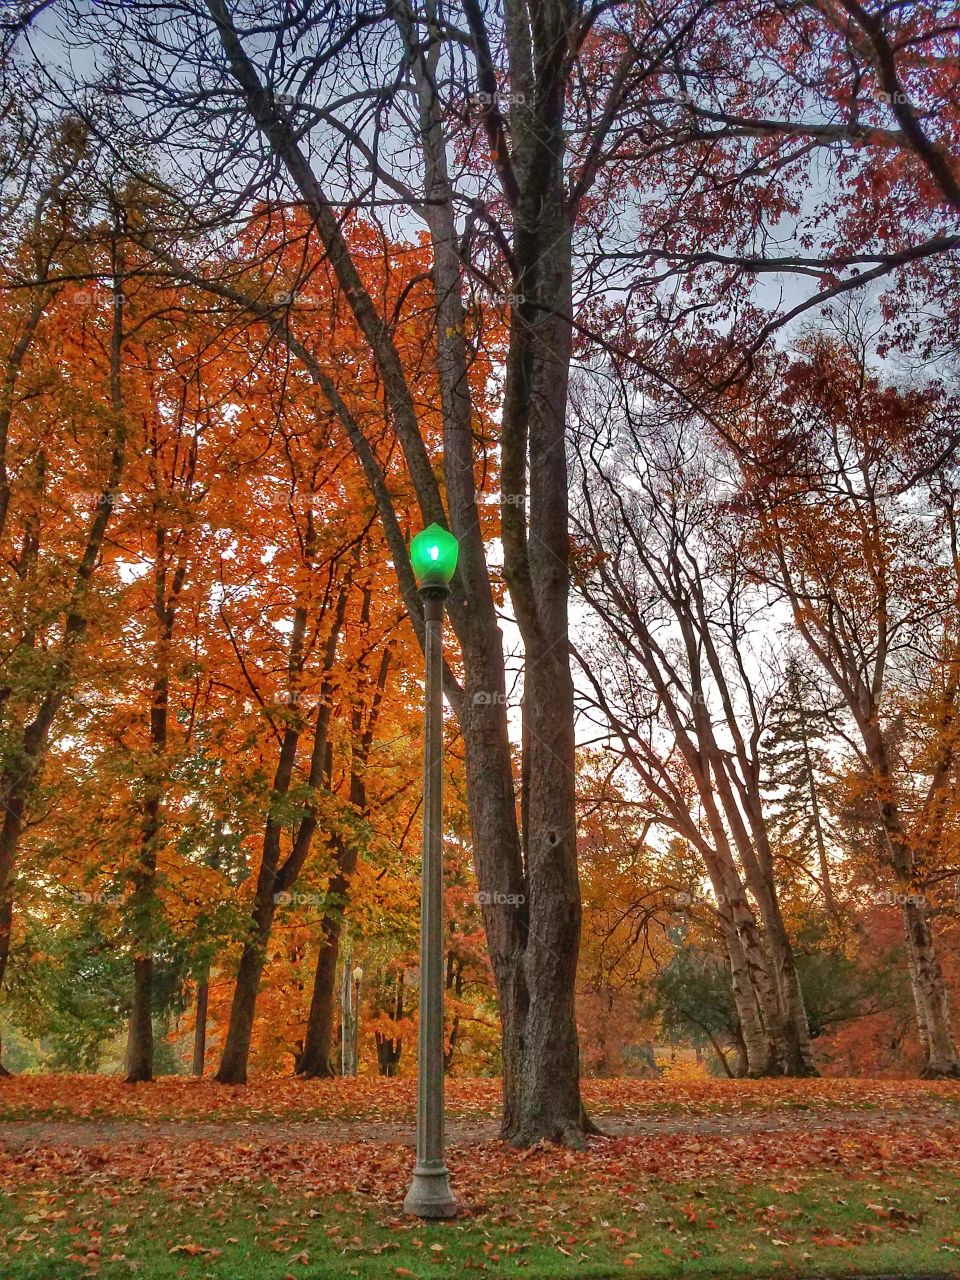 Green Street Lamp in the Park